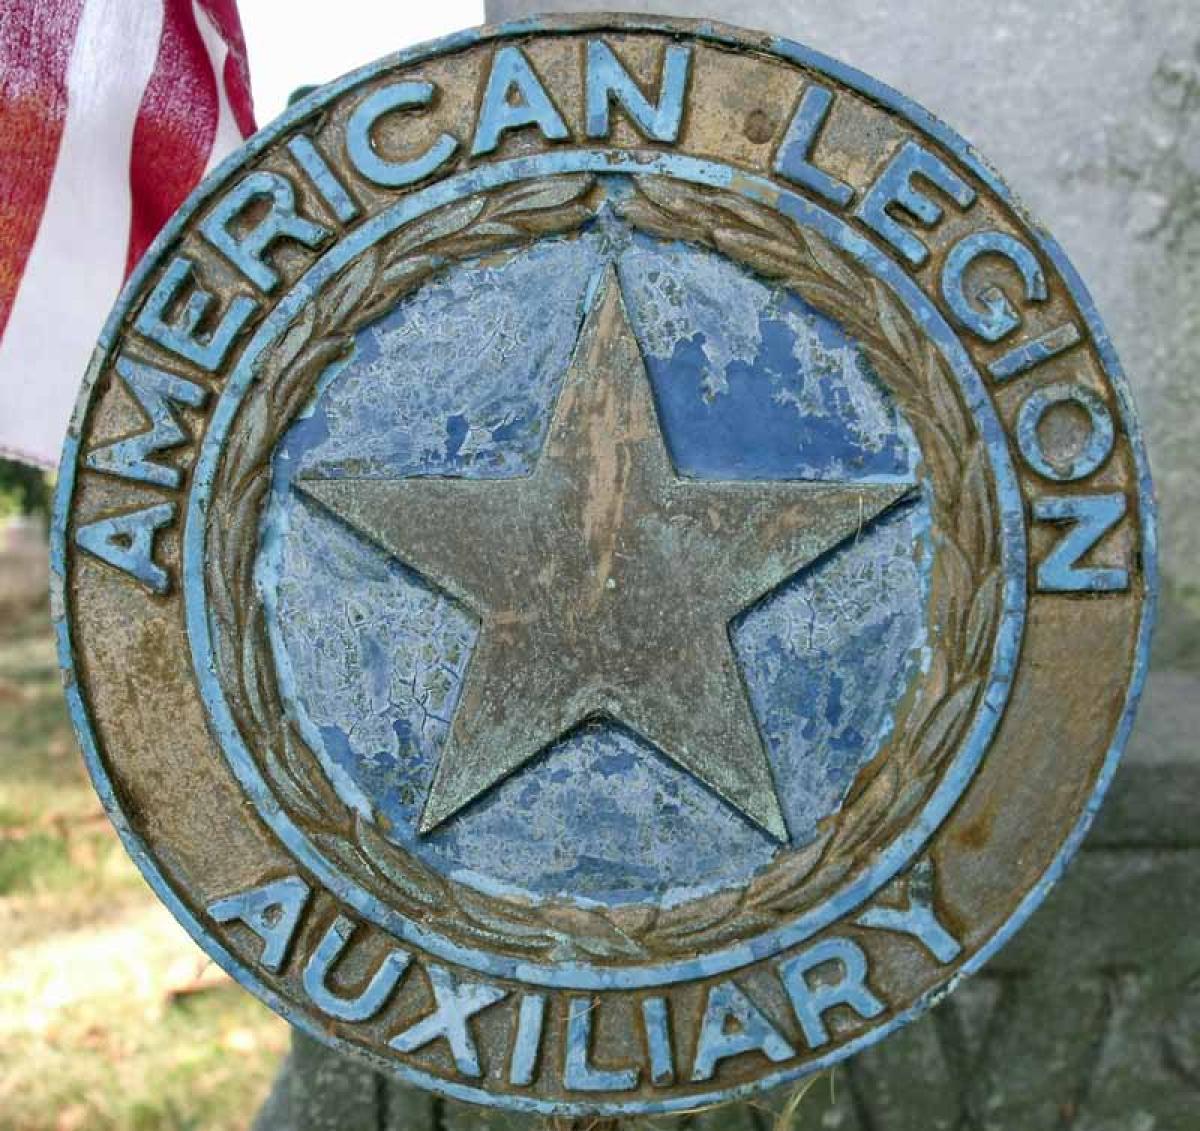 OK, Grove, Headstone Symbols and Meanings, American Legion Auxiliary